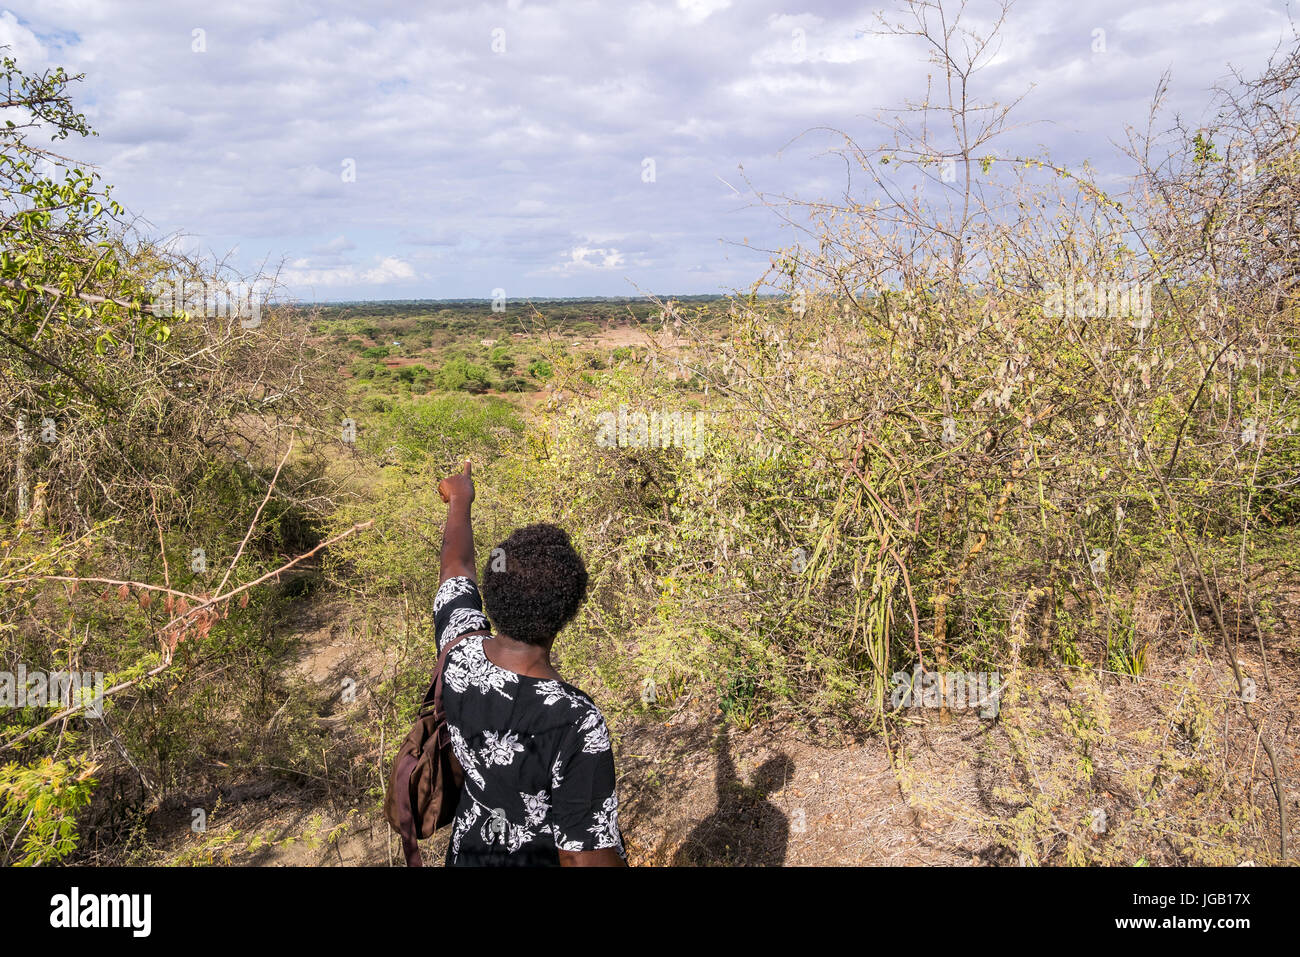 African woman pointing ahead to undeveloped countryside, Kenya Stock Photo